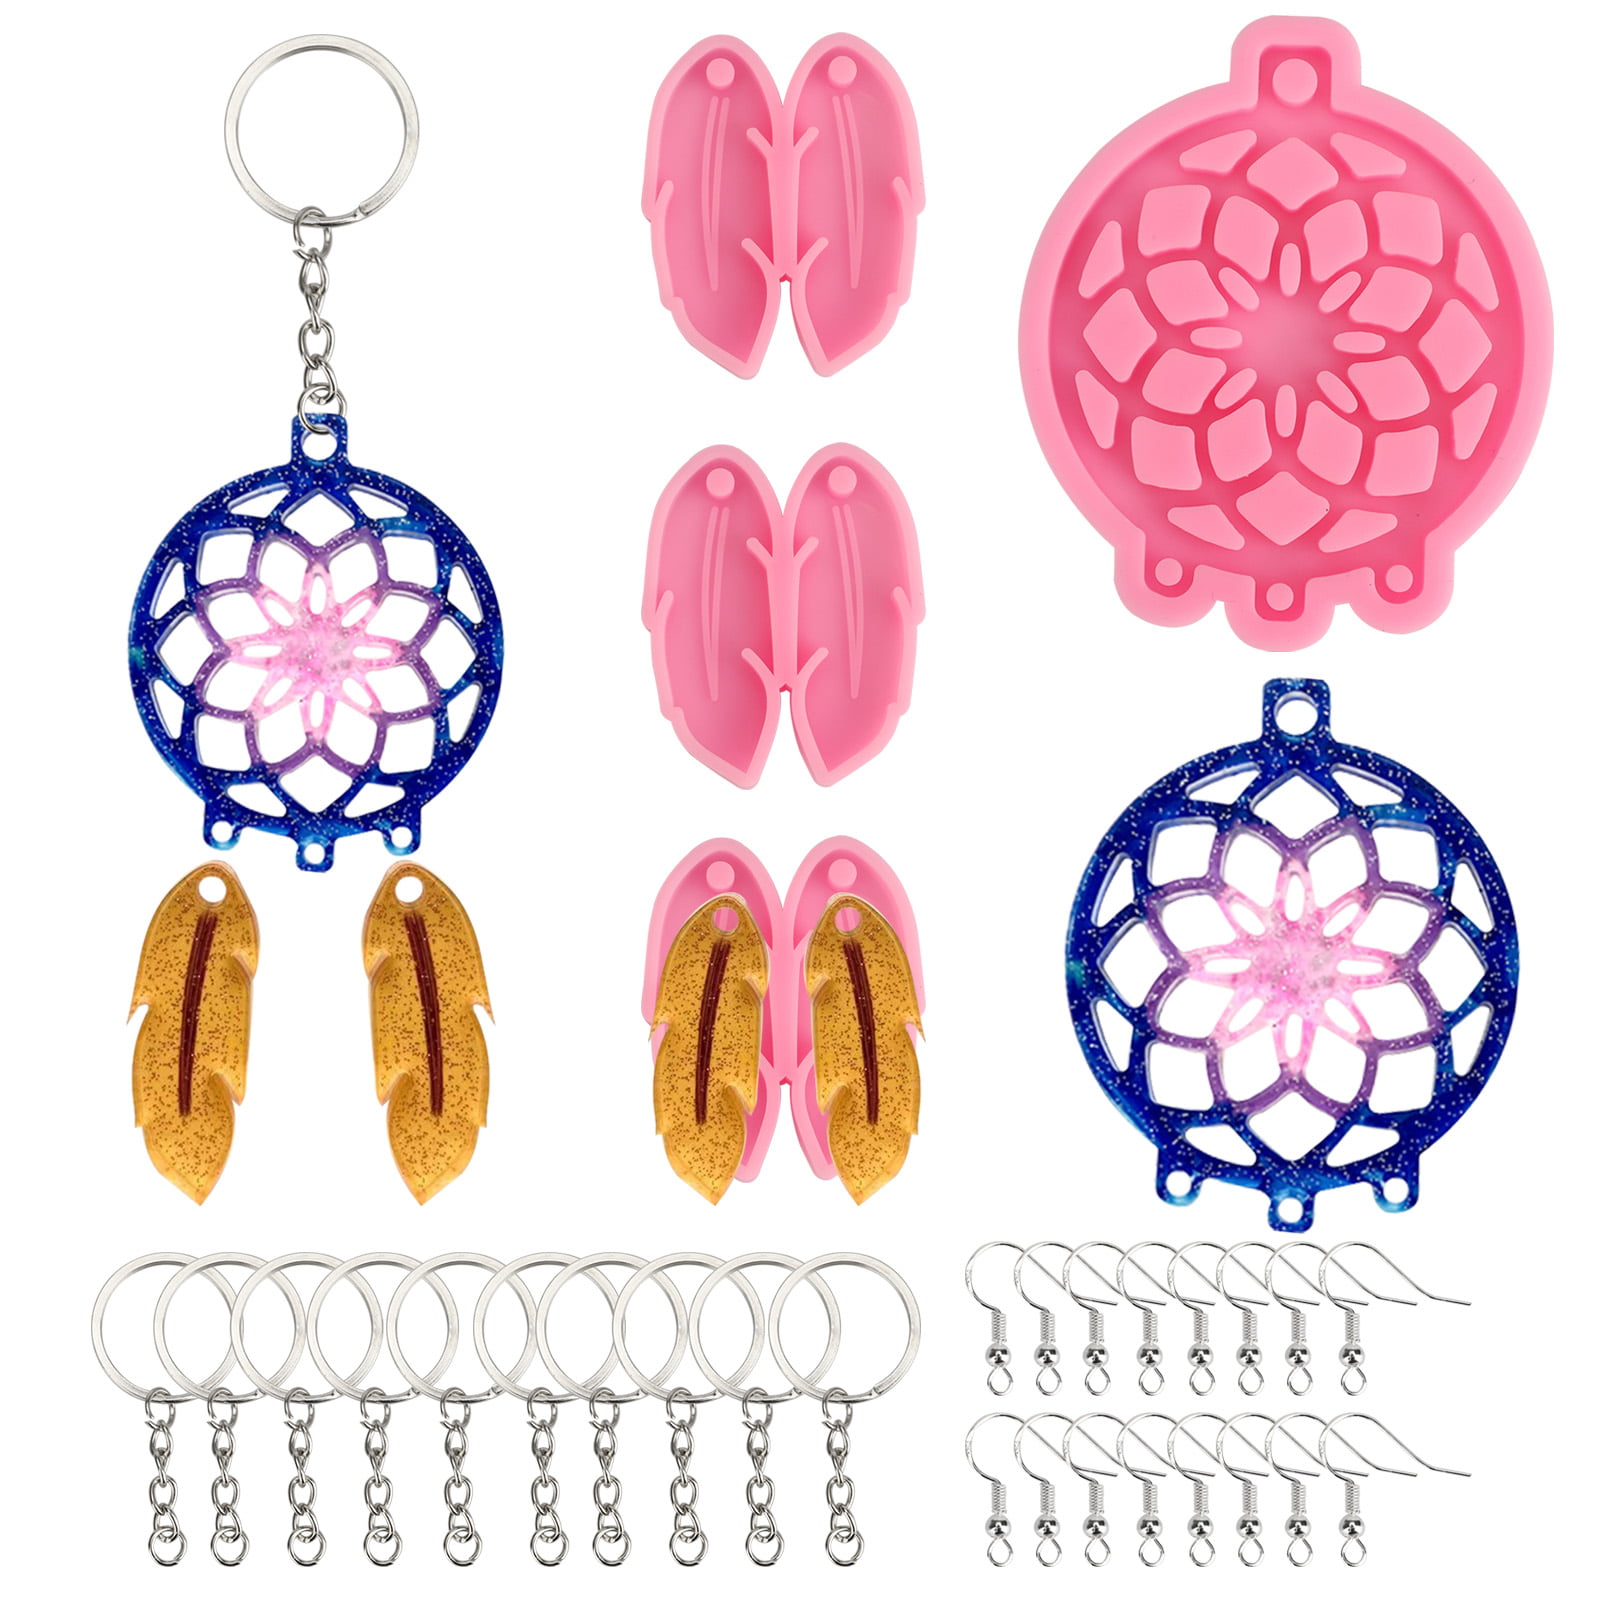 30pcs Keychain Resin Molds, TSV Silicone Epoxy Crafts Pendant Decor Molds  for DIY Christmas Gift